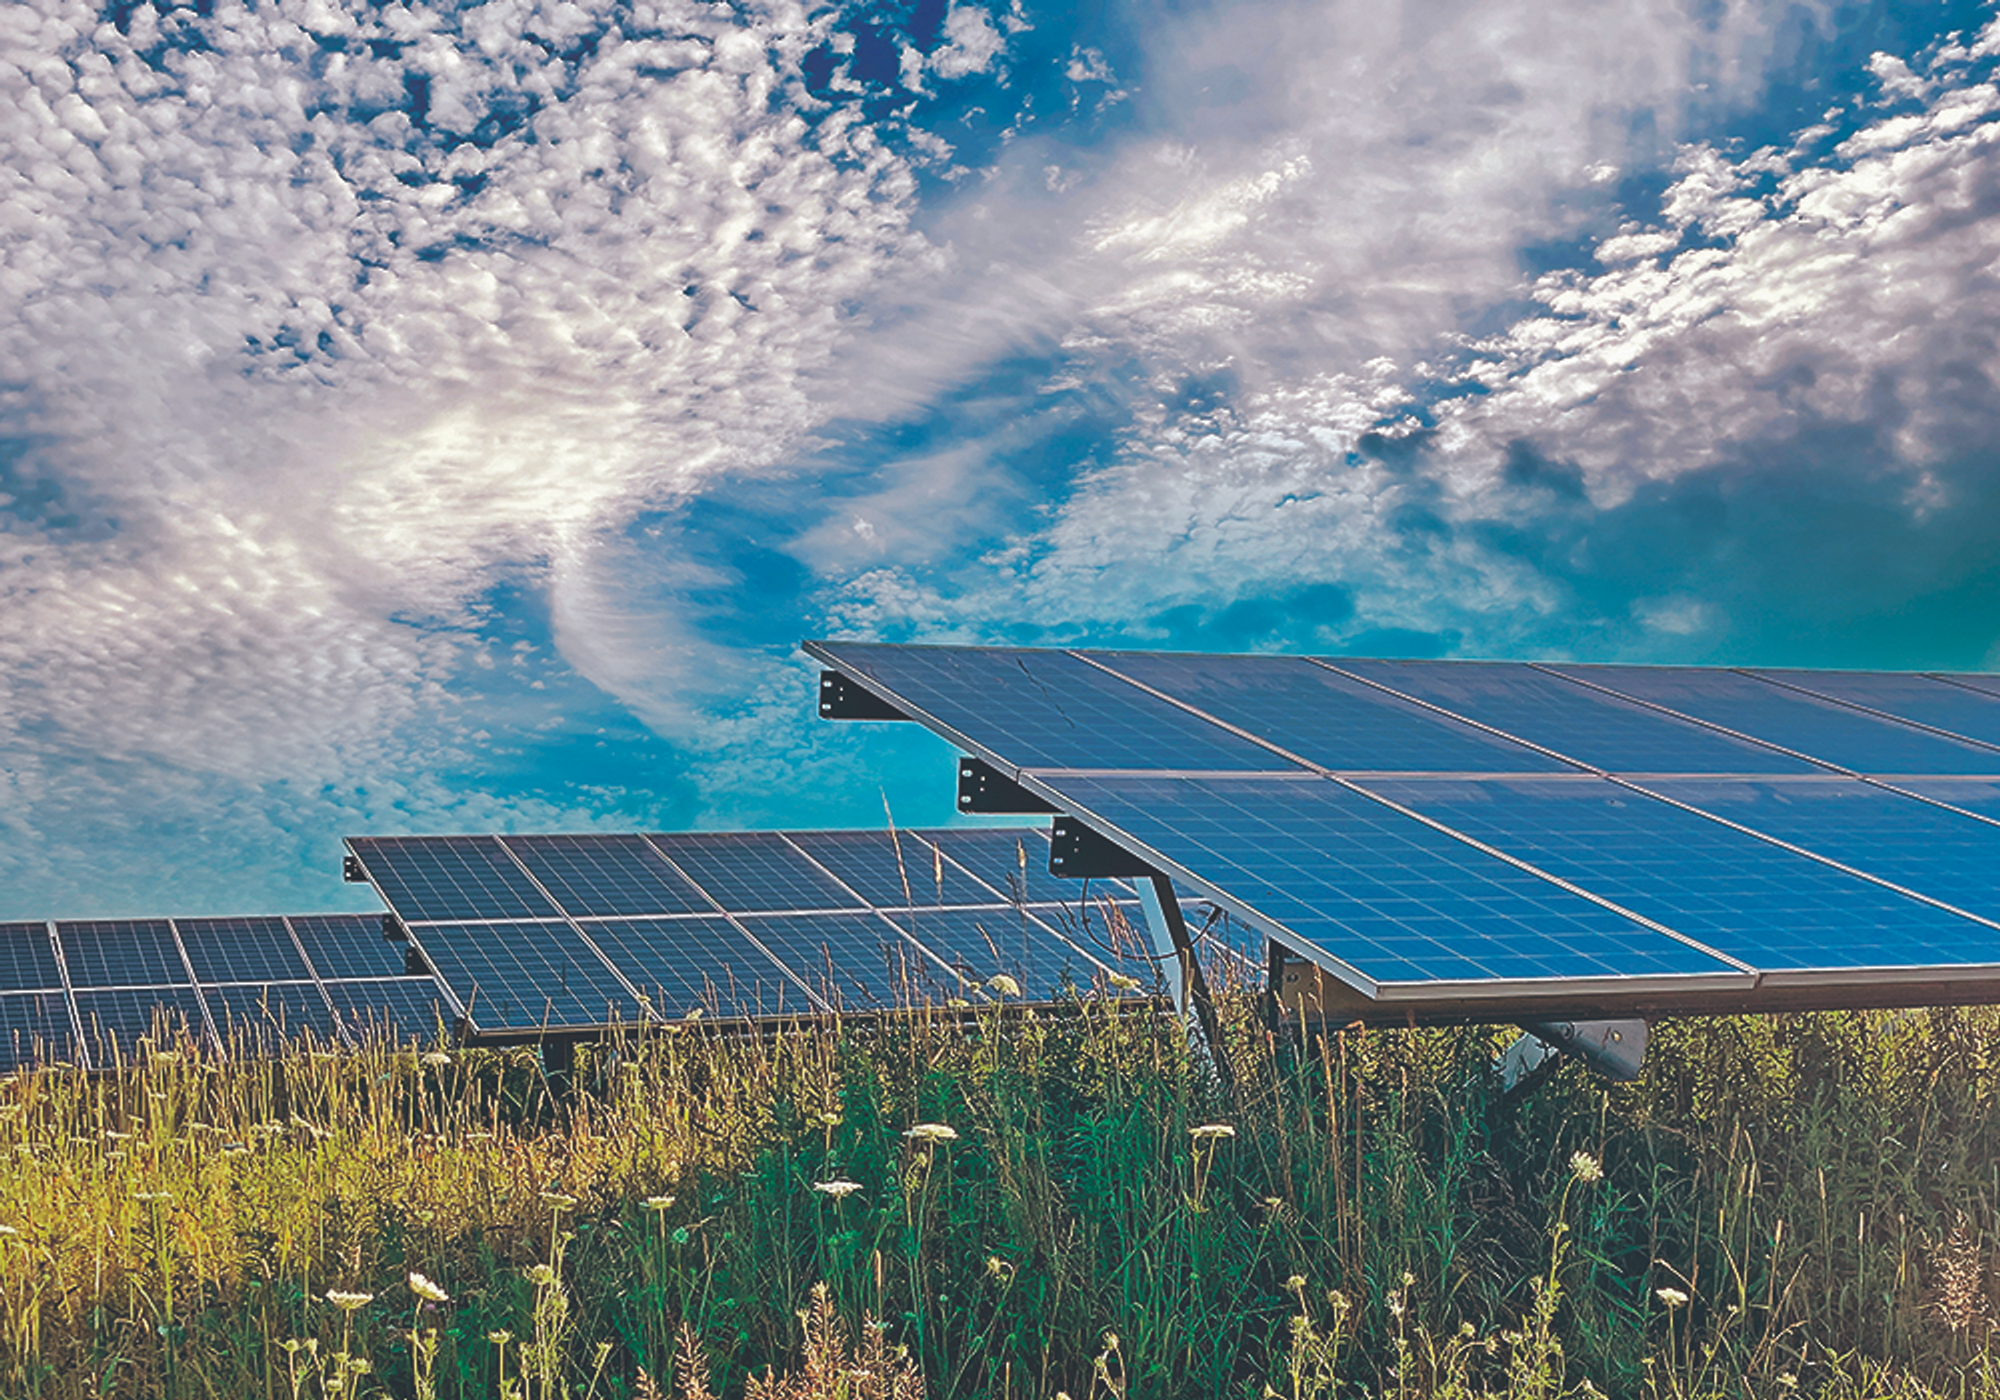 Small-scale solar expansion requires regulatory changes